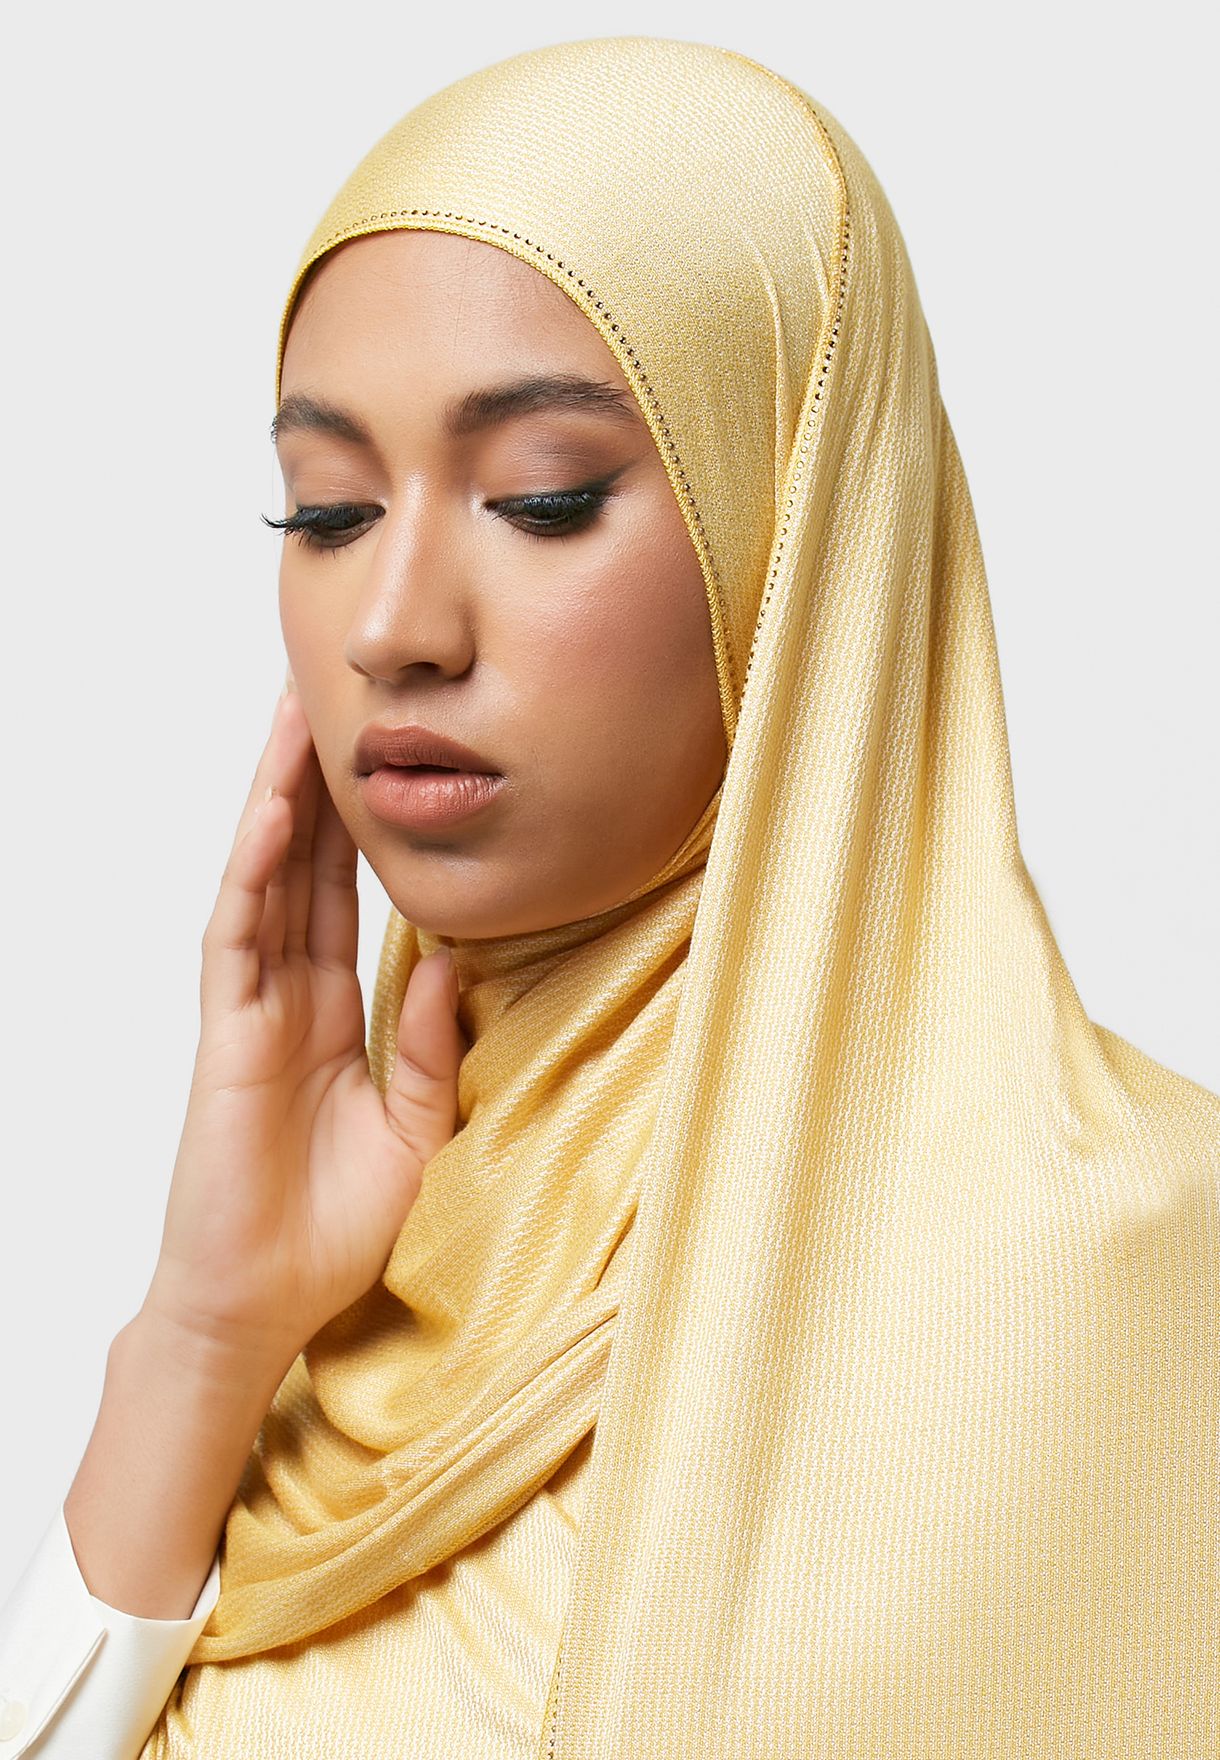 Hijab Studded With Stones On The Front Side